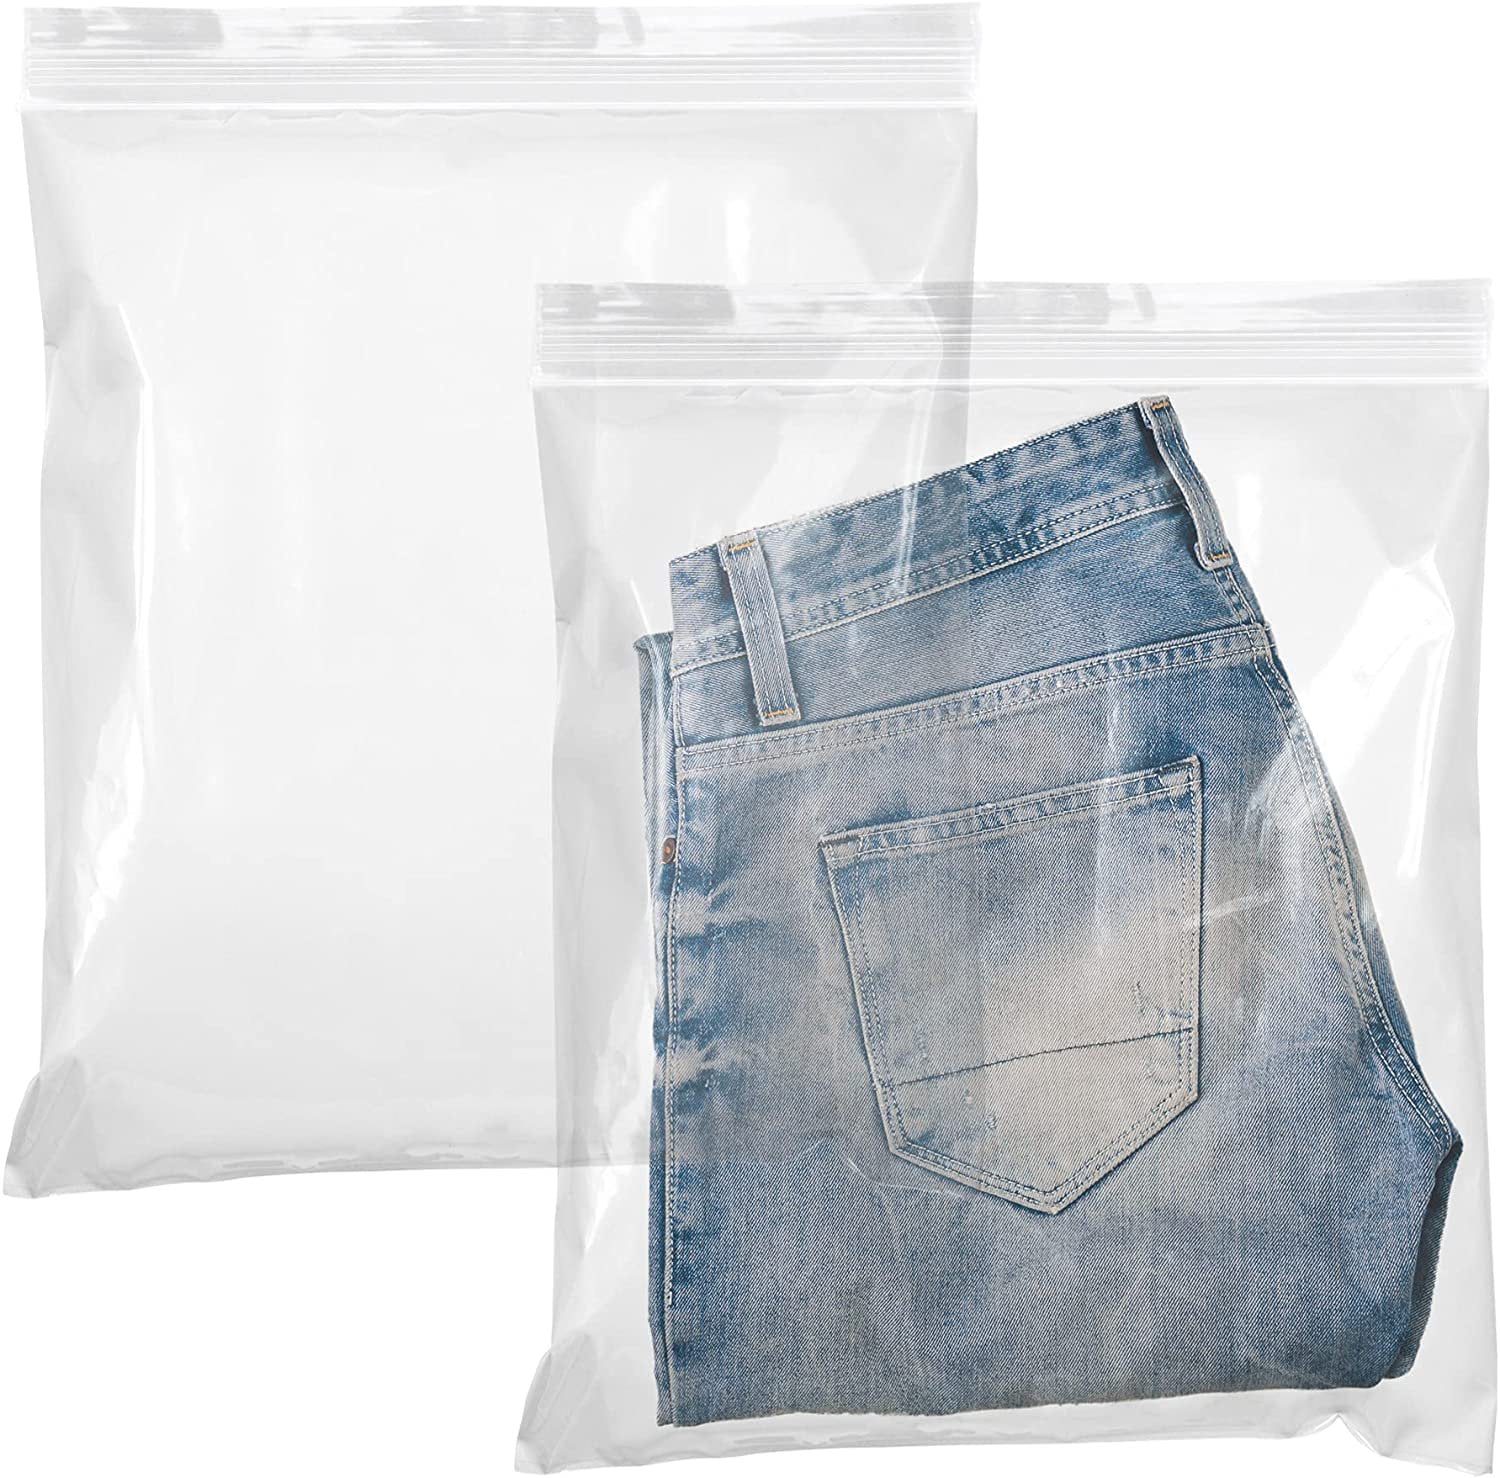 500 3x6 Reclosable Resealable Clear Zip Lock Poly Plastic Bags 2Mil 3"x 6" inch 